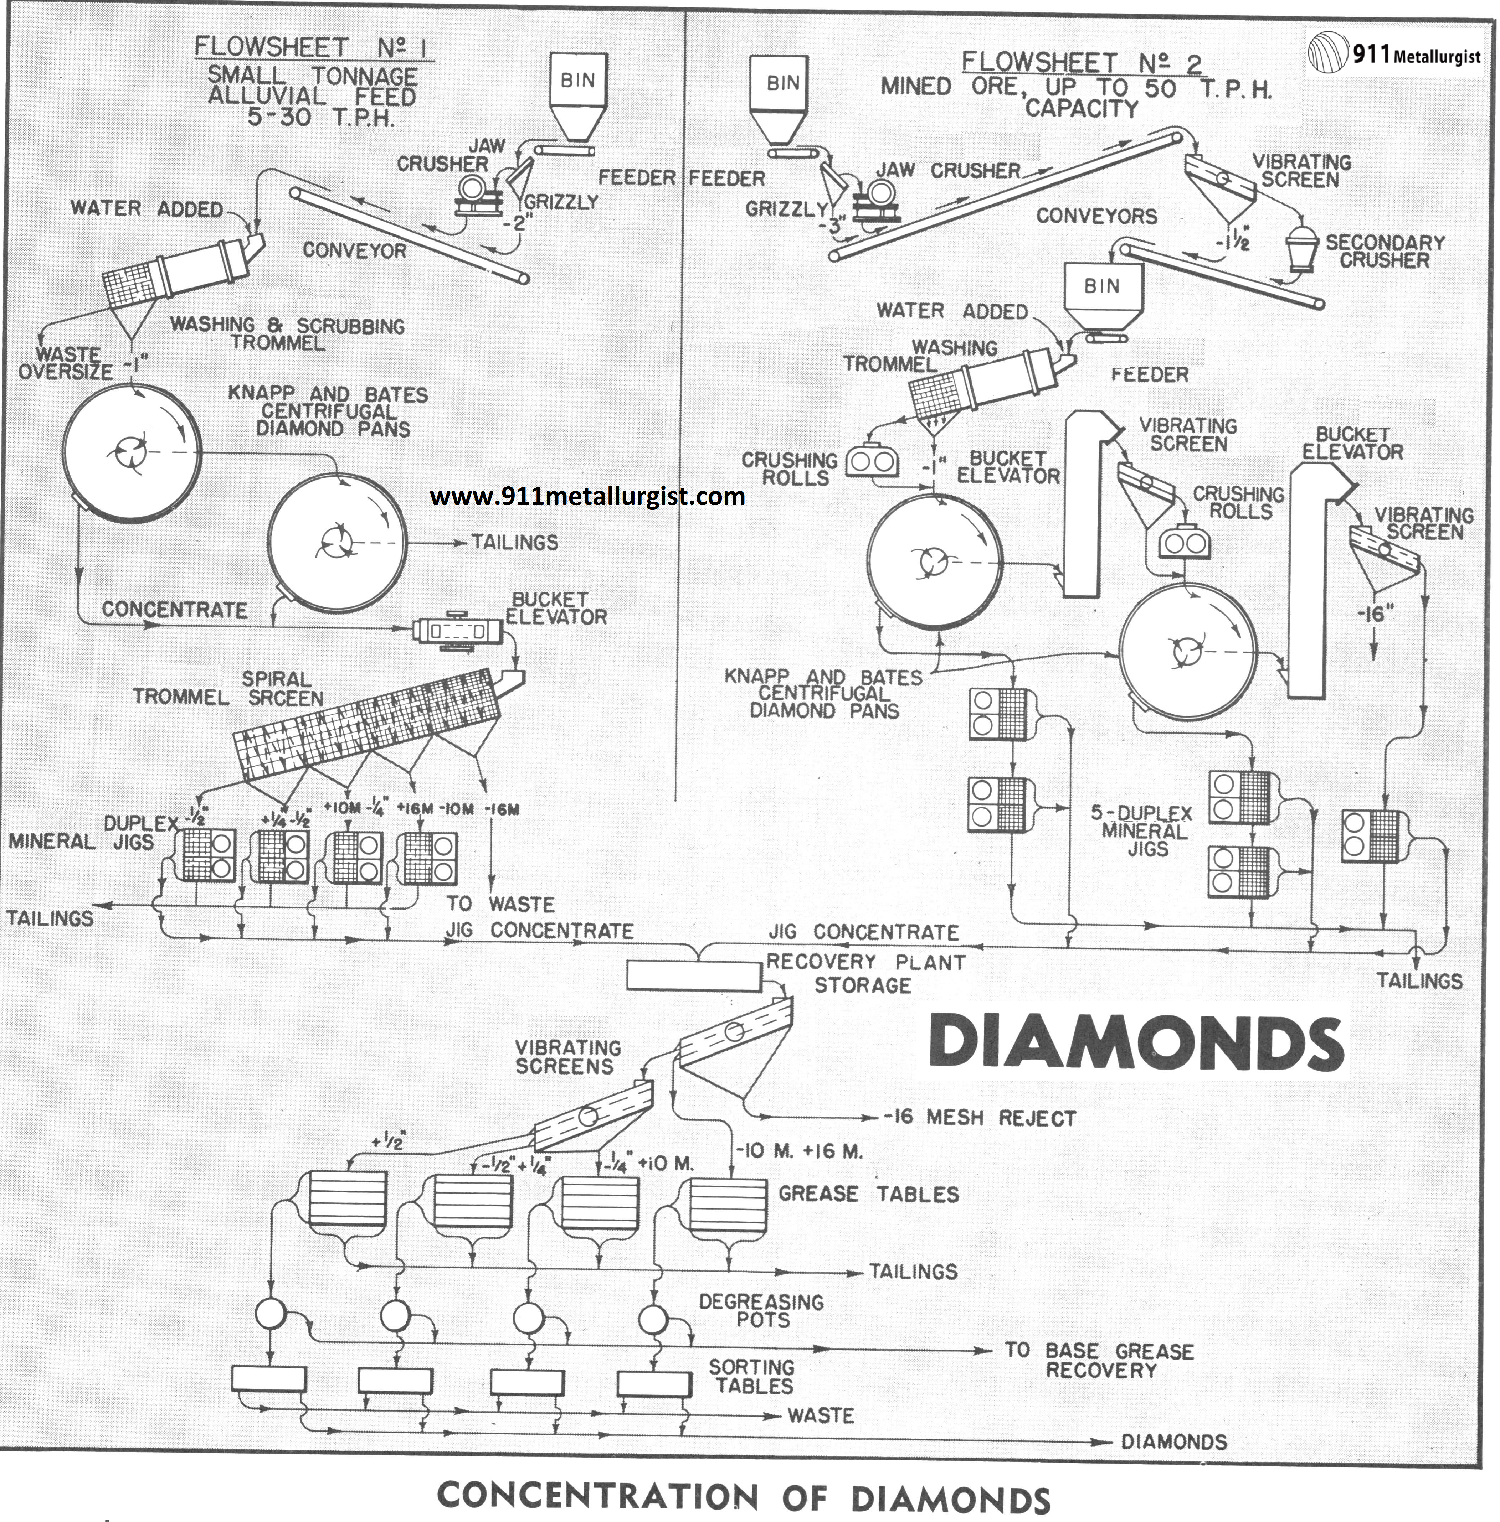 Concentration of Diamonds